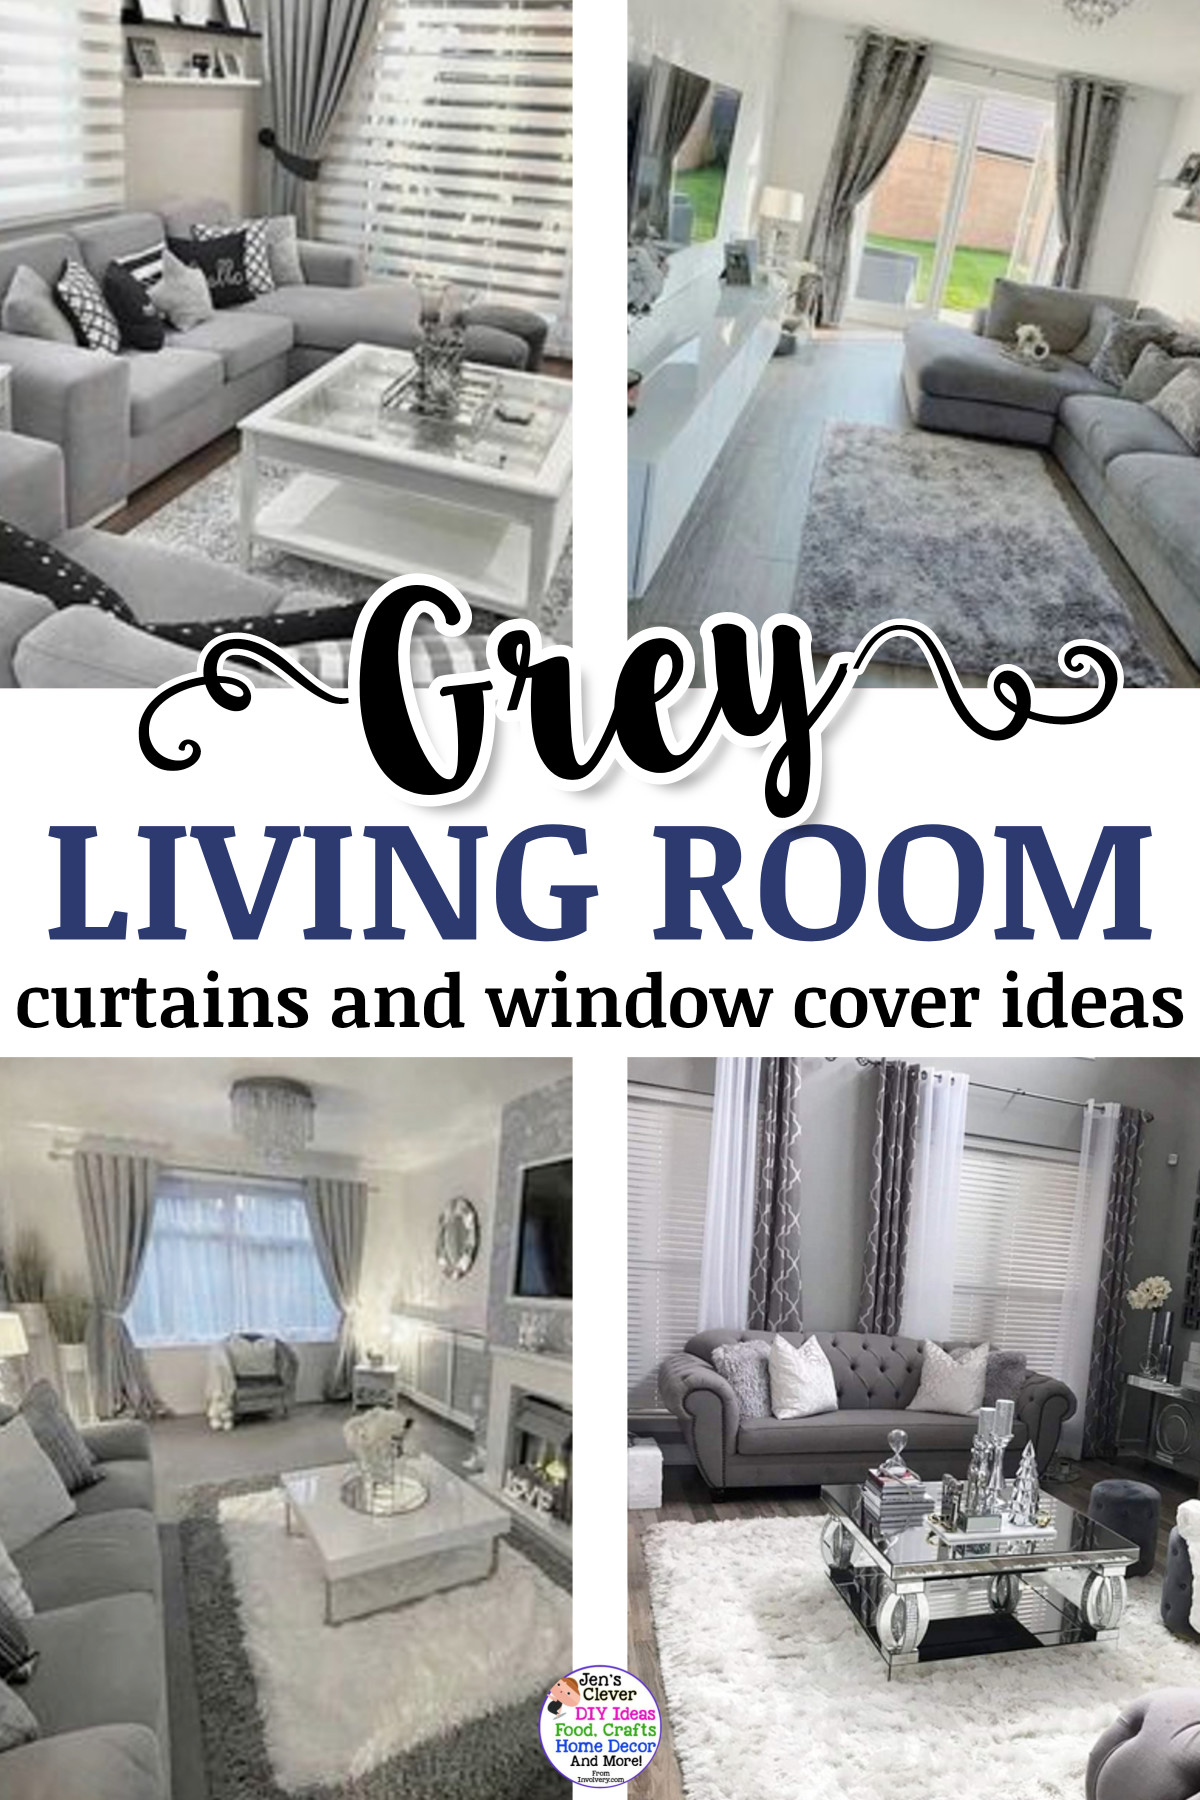 Grey Living Room Curtains and Window Covering Ideas